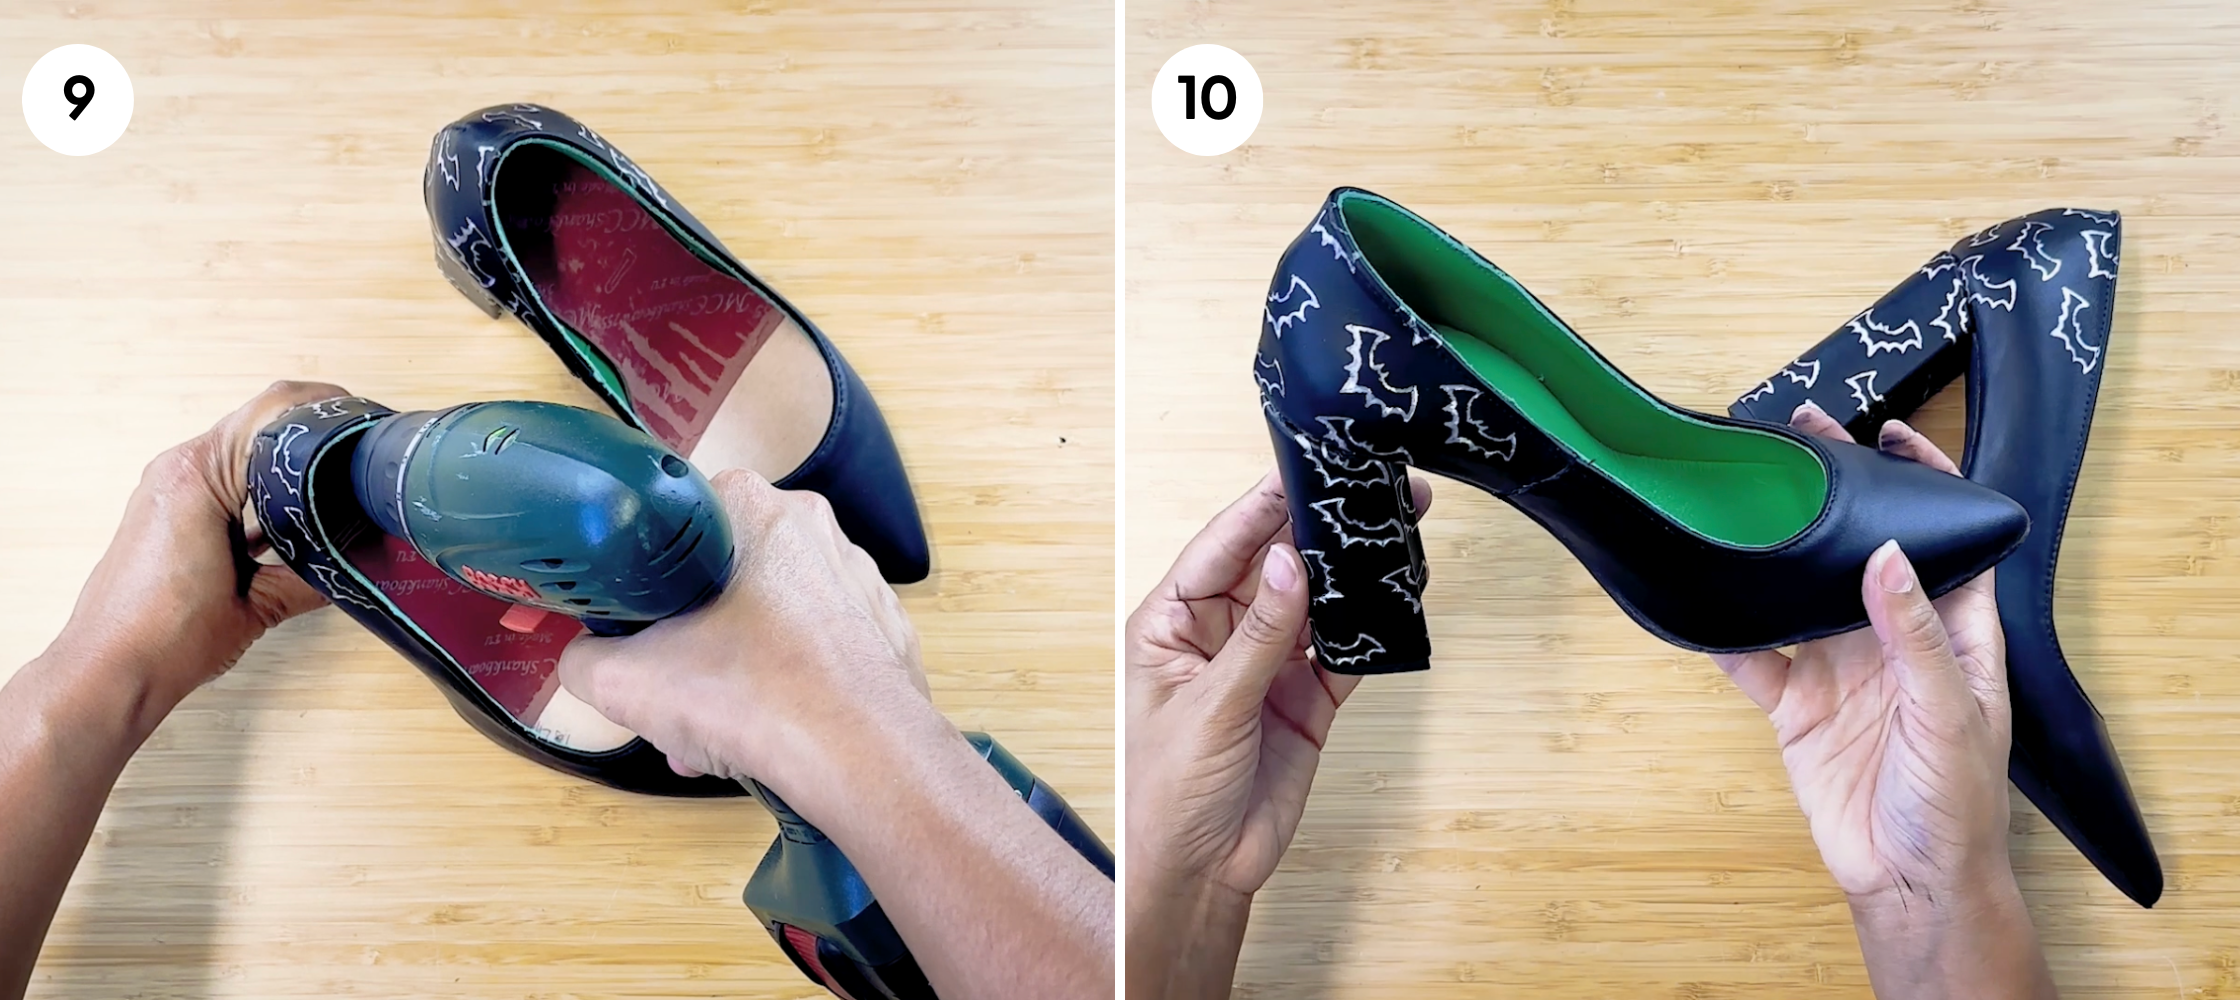 Step Nine and Ten - How To Make Halloween Shoes